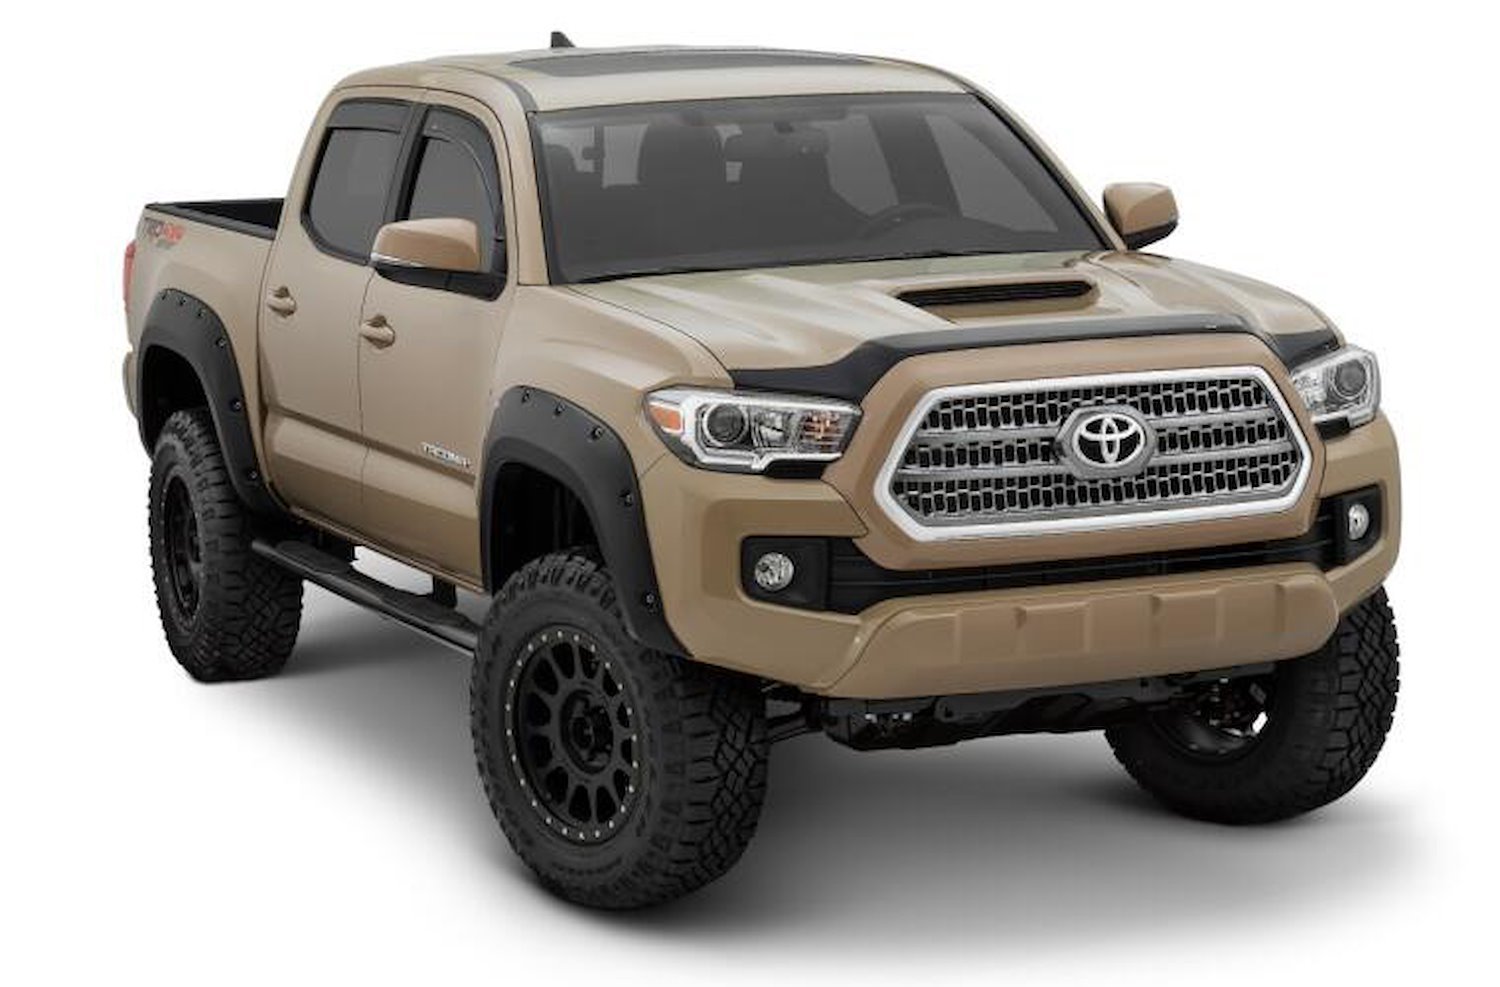 Forge Front/Rear Fender Flares for Late-Model Toyota Tacoma